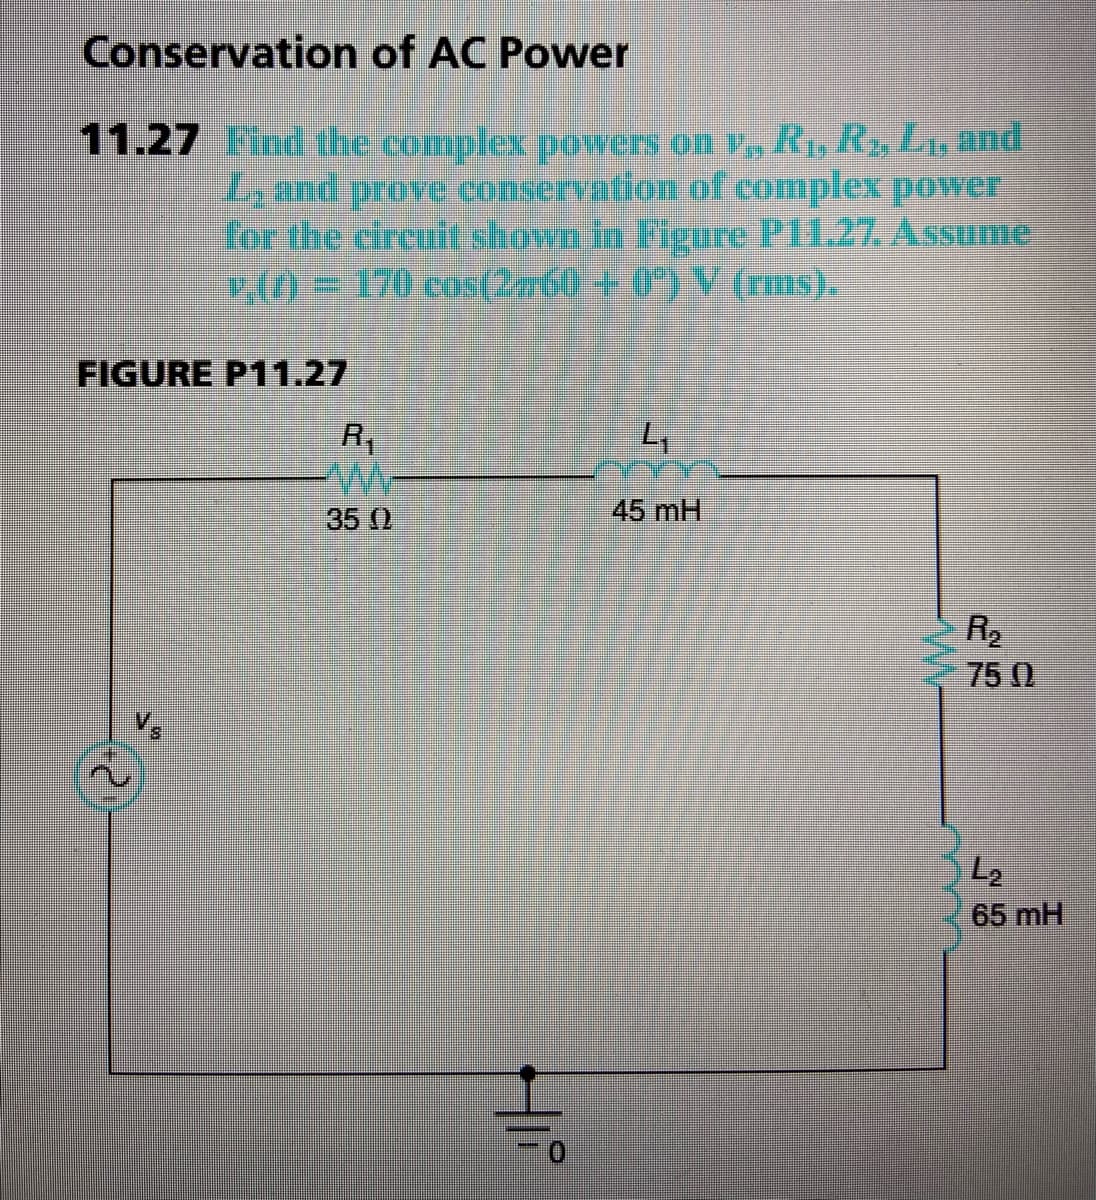 Conservation of AC Power
11.27 Find the complex powers on v, R1, Rz, Lu and
L, and prove conservation of complex power
for the circult shown in Figure Pl1.27. ASsume
L) = 170 cos(2n60 + 0*) V (rms).
FIGURE P11.27
R,
35 ()
45 mH
R2
75 0
L2
65 mH
